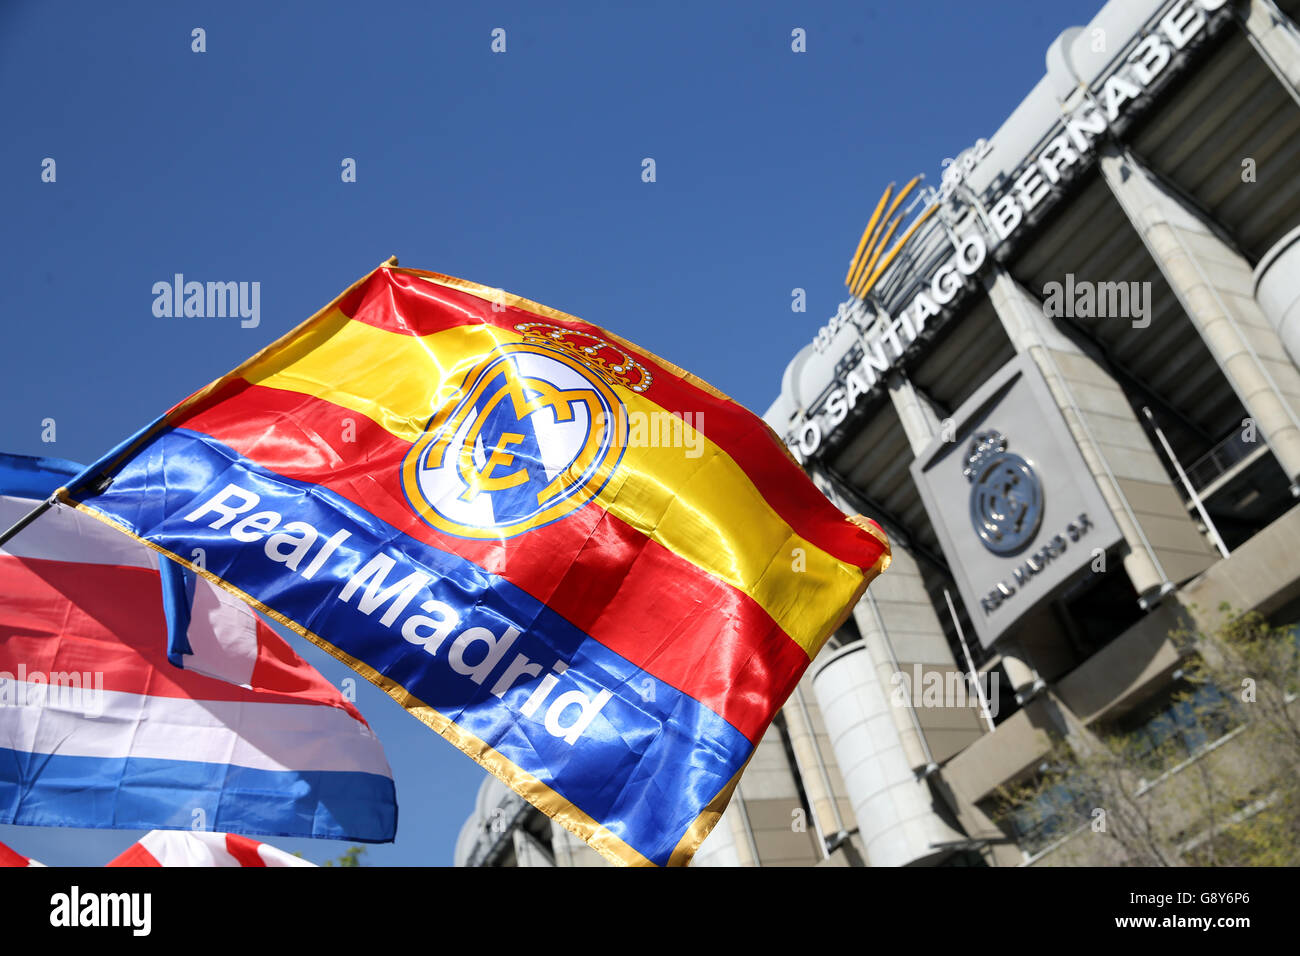 A general view of Real Madrid flags outside the stadium prior to the UEFA Champions League Semi Final, Second Leg match at the Santiago Bernabeu, Madrid. Stock Photo